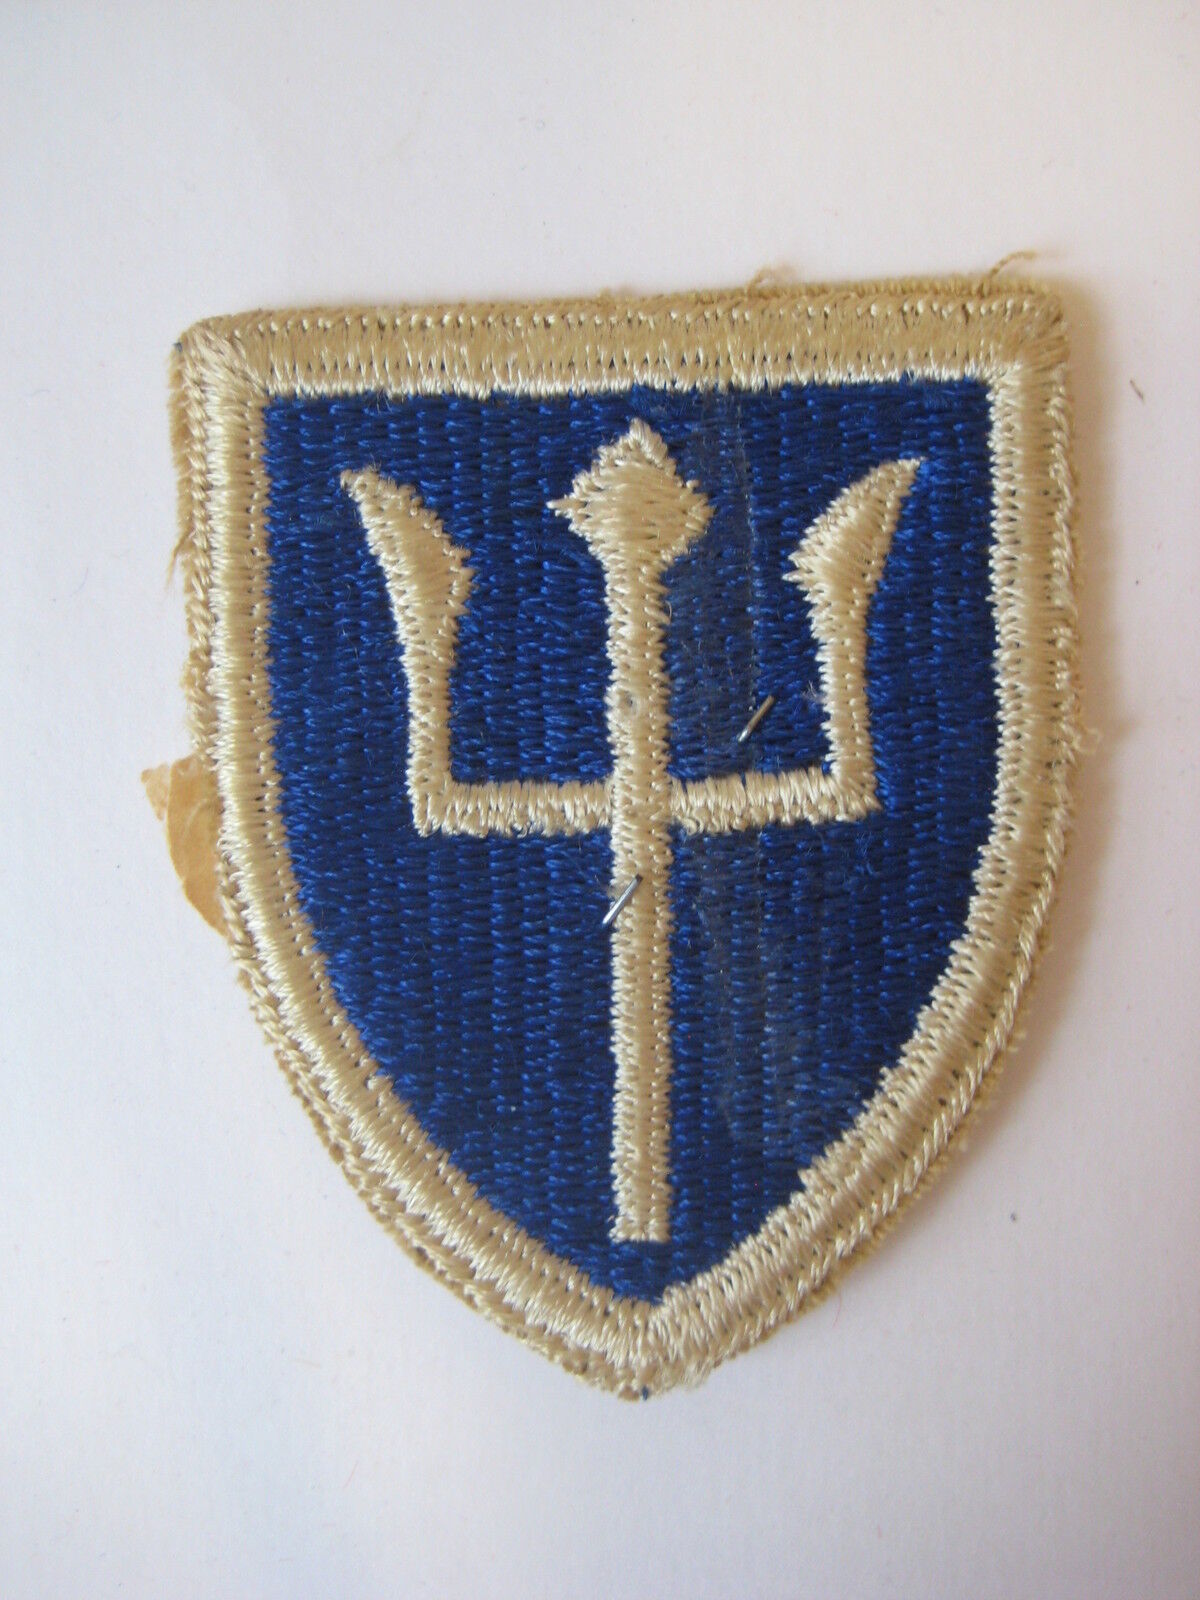 US Army military vtg 97th Infantry Division PATCH usa uniform badge WWII era ?